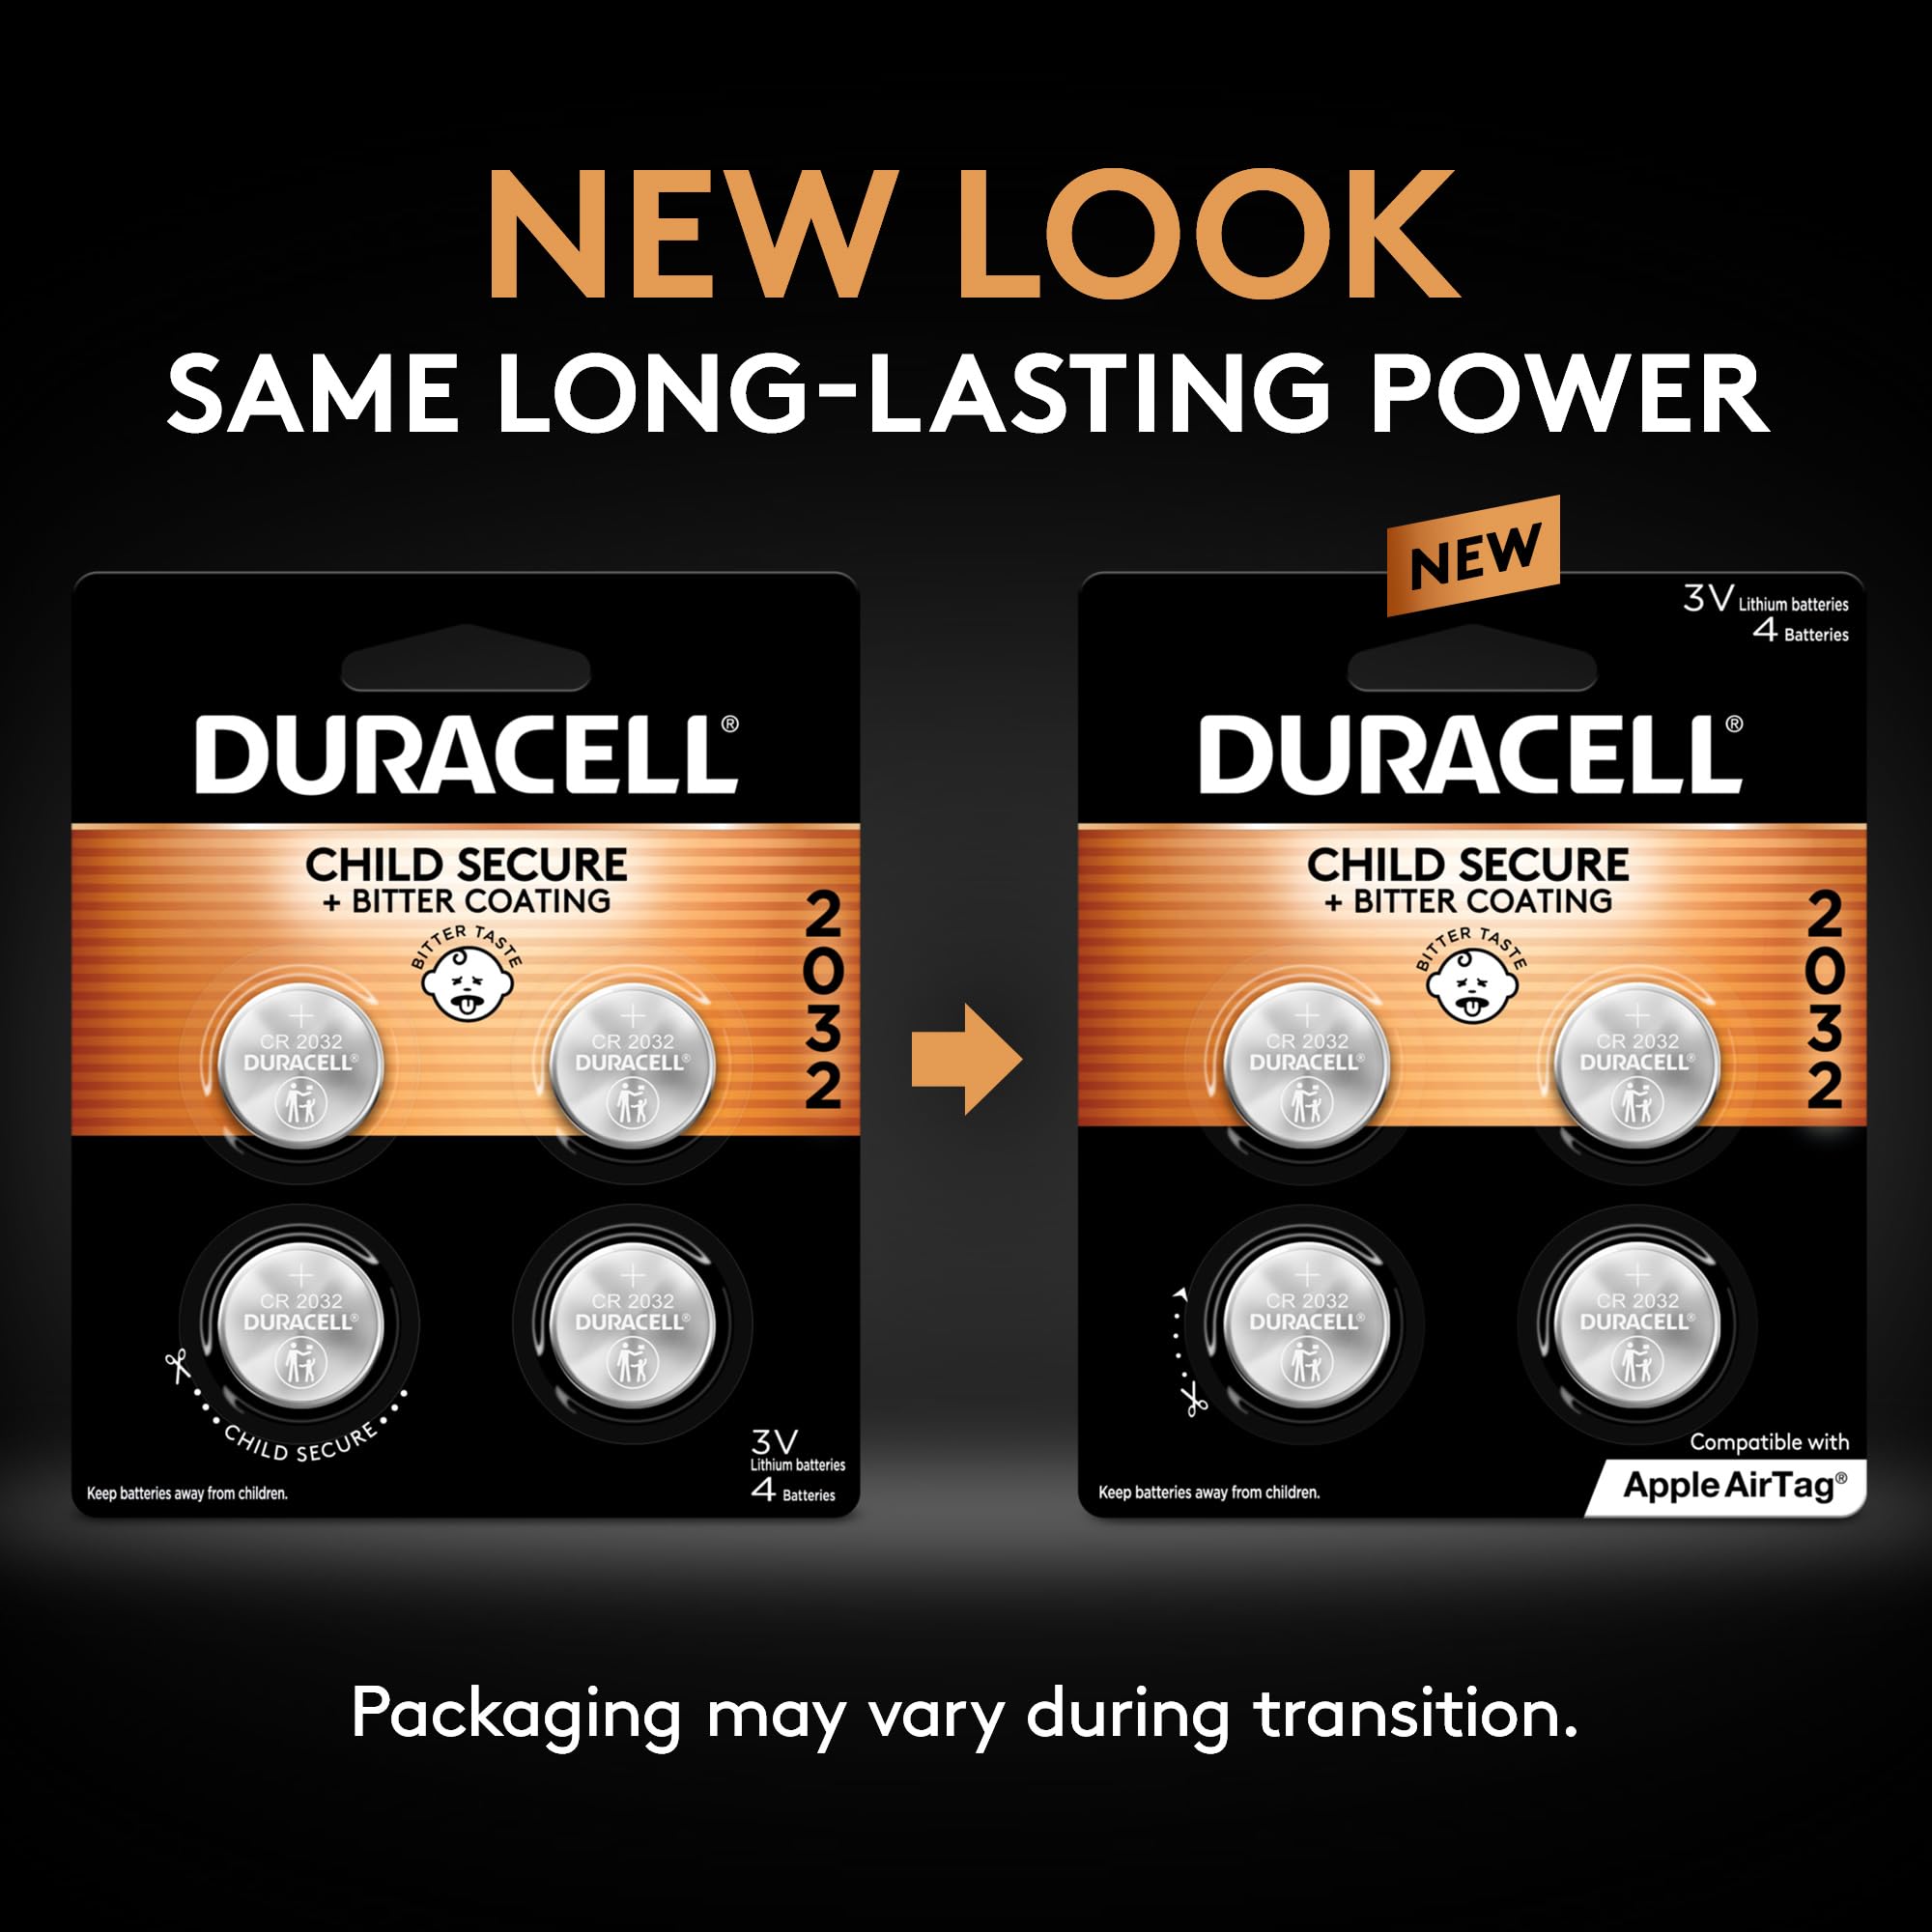 Duracell CR2032 3V Lithium Battery, Child Safety Features, 4 Count Pack, Lithium Coin Battery for Key Fob, Car Remote, Glucose Monitor, CR Lithium 3 Volt Cell